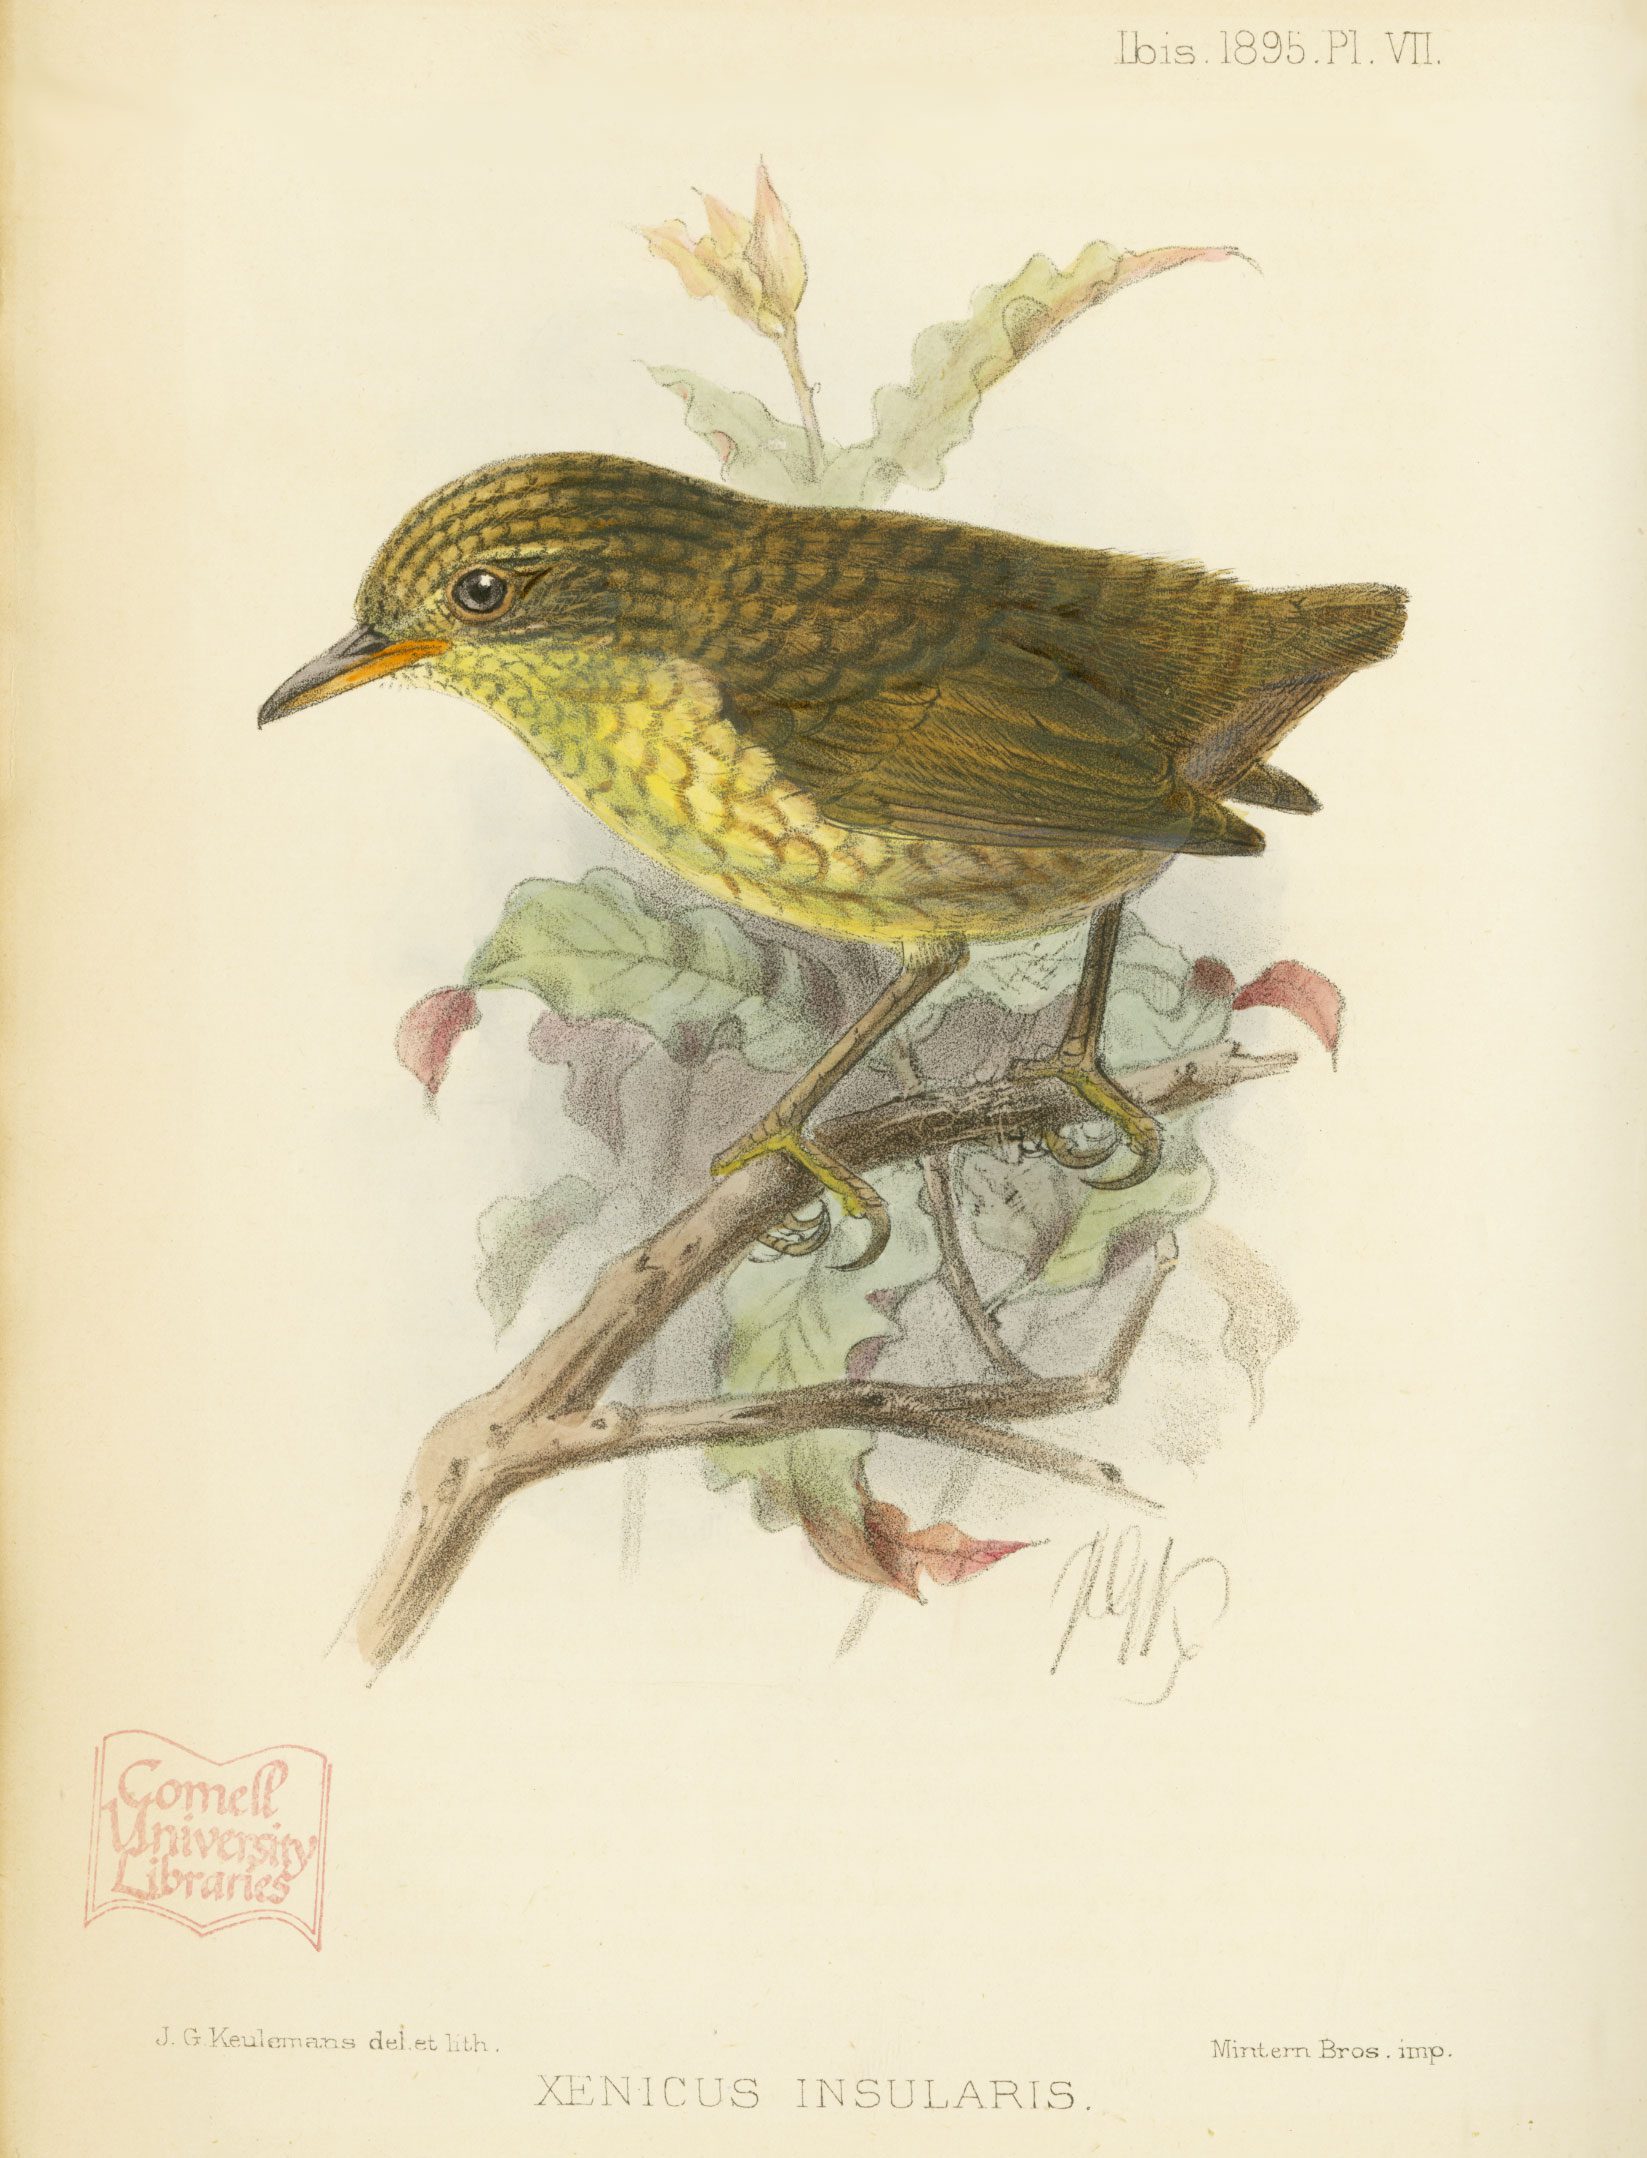 The Ibis, a British ornithological journal, produced this lithograph of the Stephens Island Wren by Dutch artist John Gerrard Keulemans in 1895. Reprinted by permission of John Wiley & Sons, Inc.